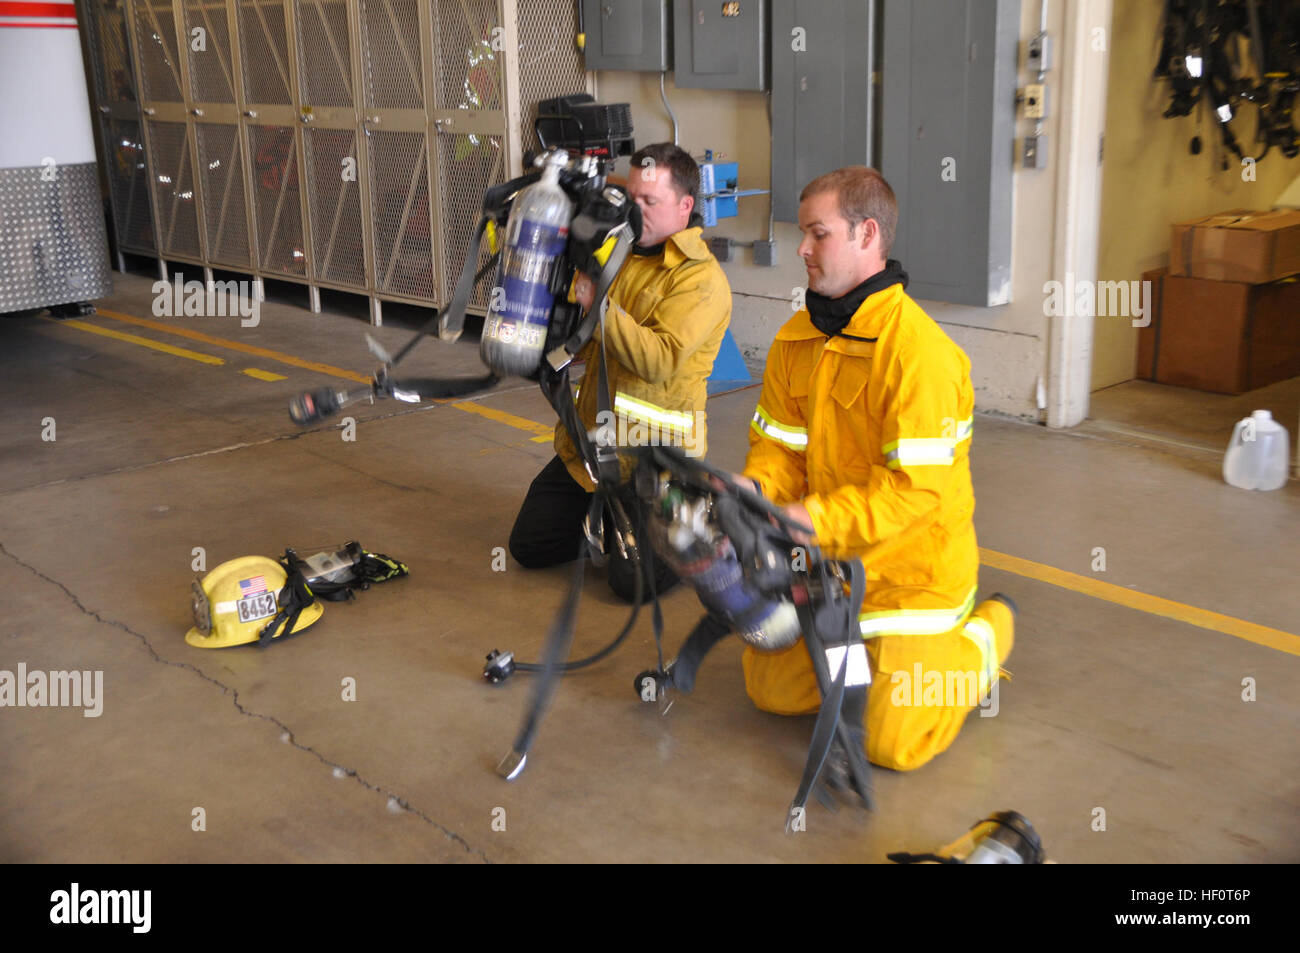 Agent Jeff Swearingen (right) with the Criminal Investigation Division of the Police Department aboard Marine Corps Logistics Base Barstow and Fire Prevention Officer Gaberiel Hammett, with the Fire Department aboard MCLB Barstow, don their self-contained breathing aparatus during a cross-training session at the main fire station aboard the base May 9. Swearingen is an arson investigator with the  of the police department learning about fire operations with the aim of becoming a more effective arson investigator. Marine Corps police cross-train with base fire department in arson investigation  Stock Photo